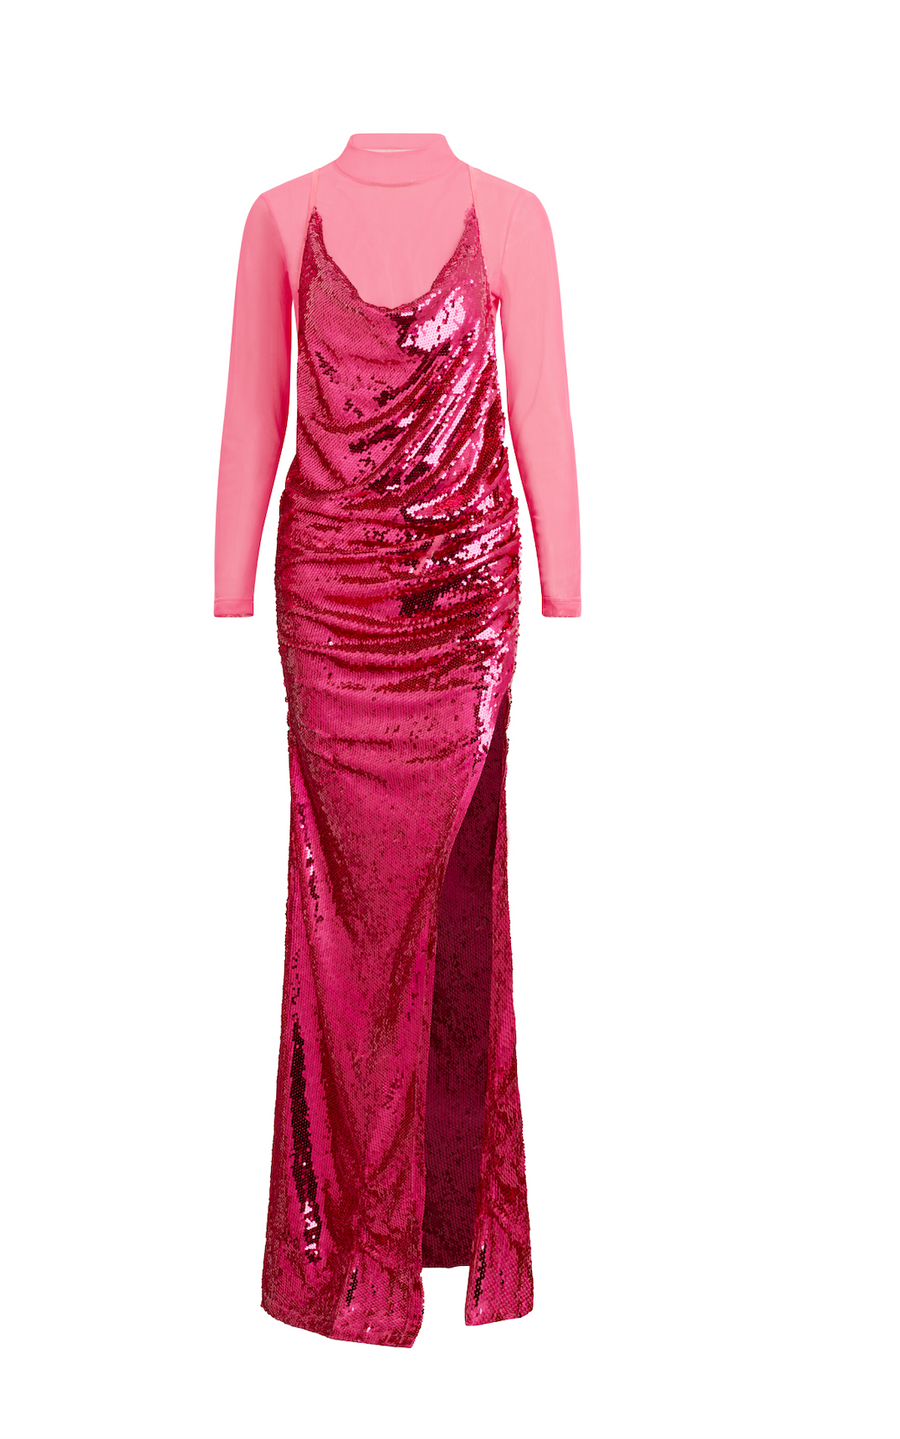 Hot Pink Sequin Dress with Turtle Neck